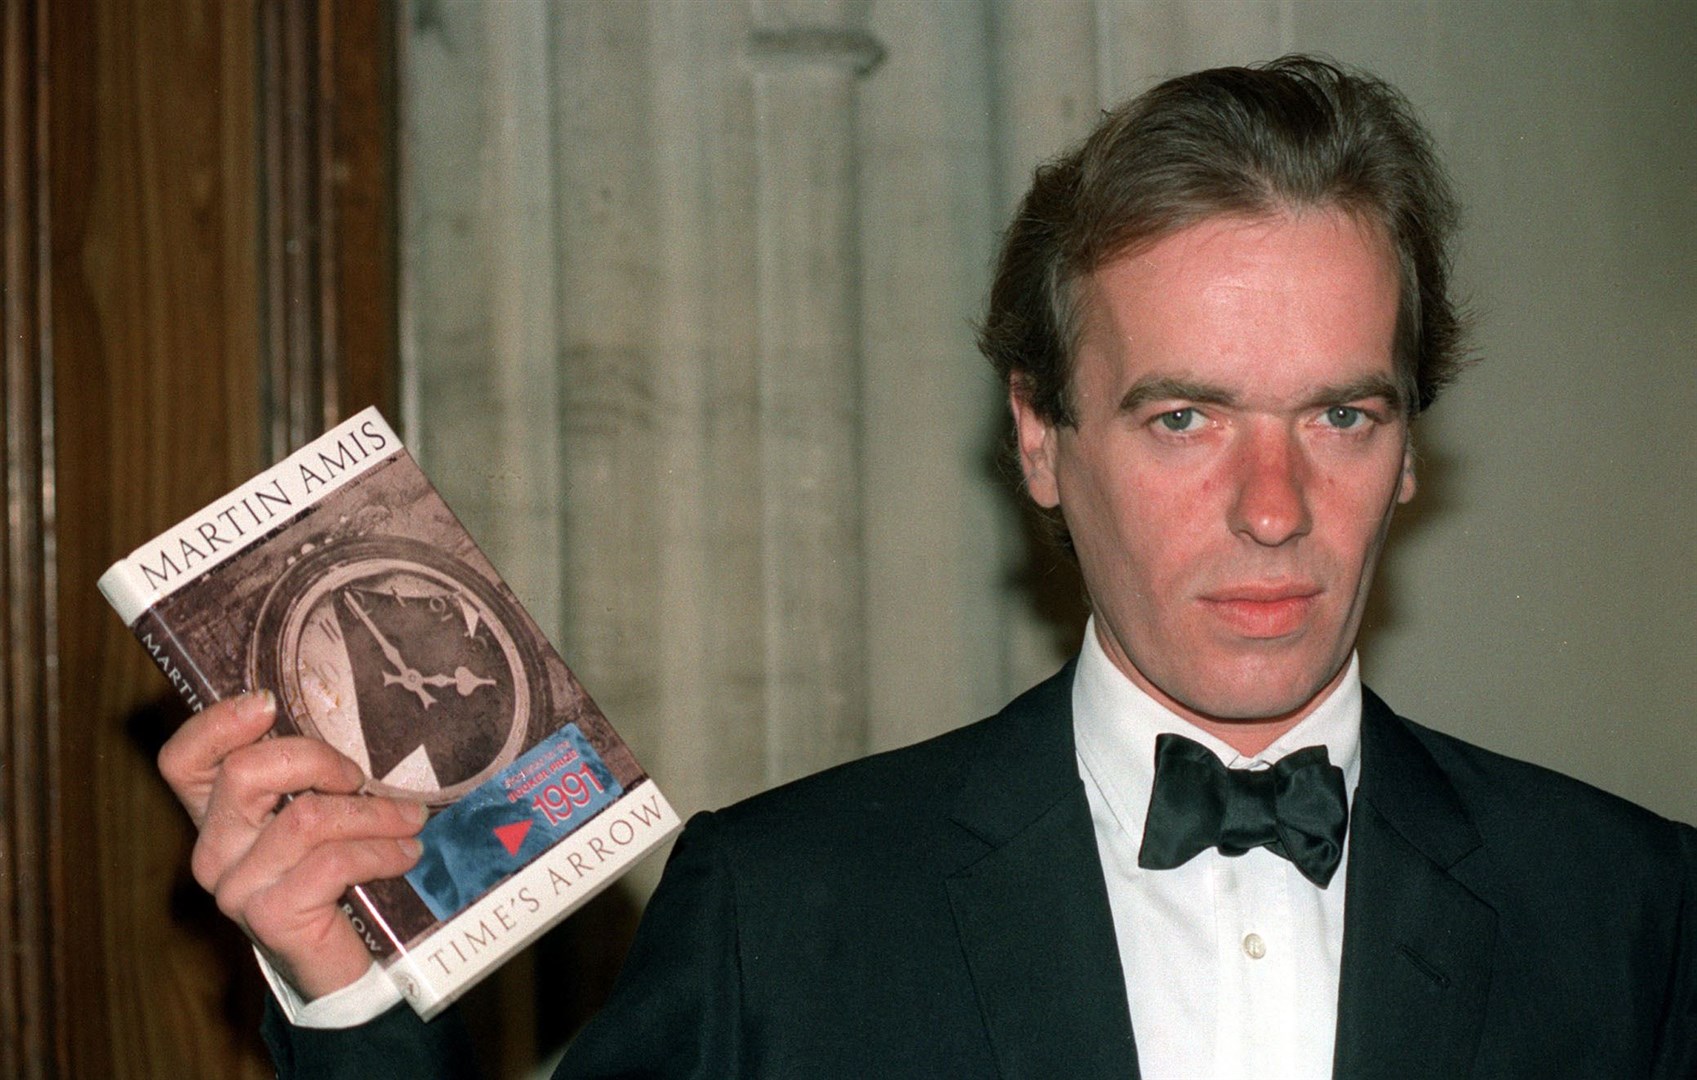 Martin Amis at the Booker Prize ceremony in London (PA)